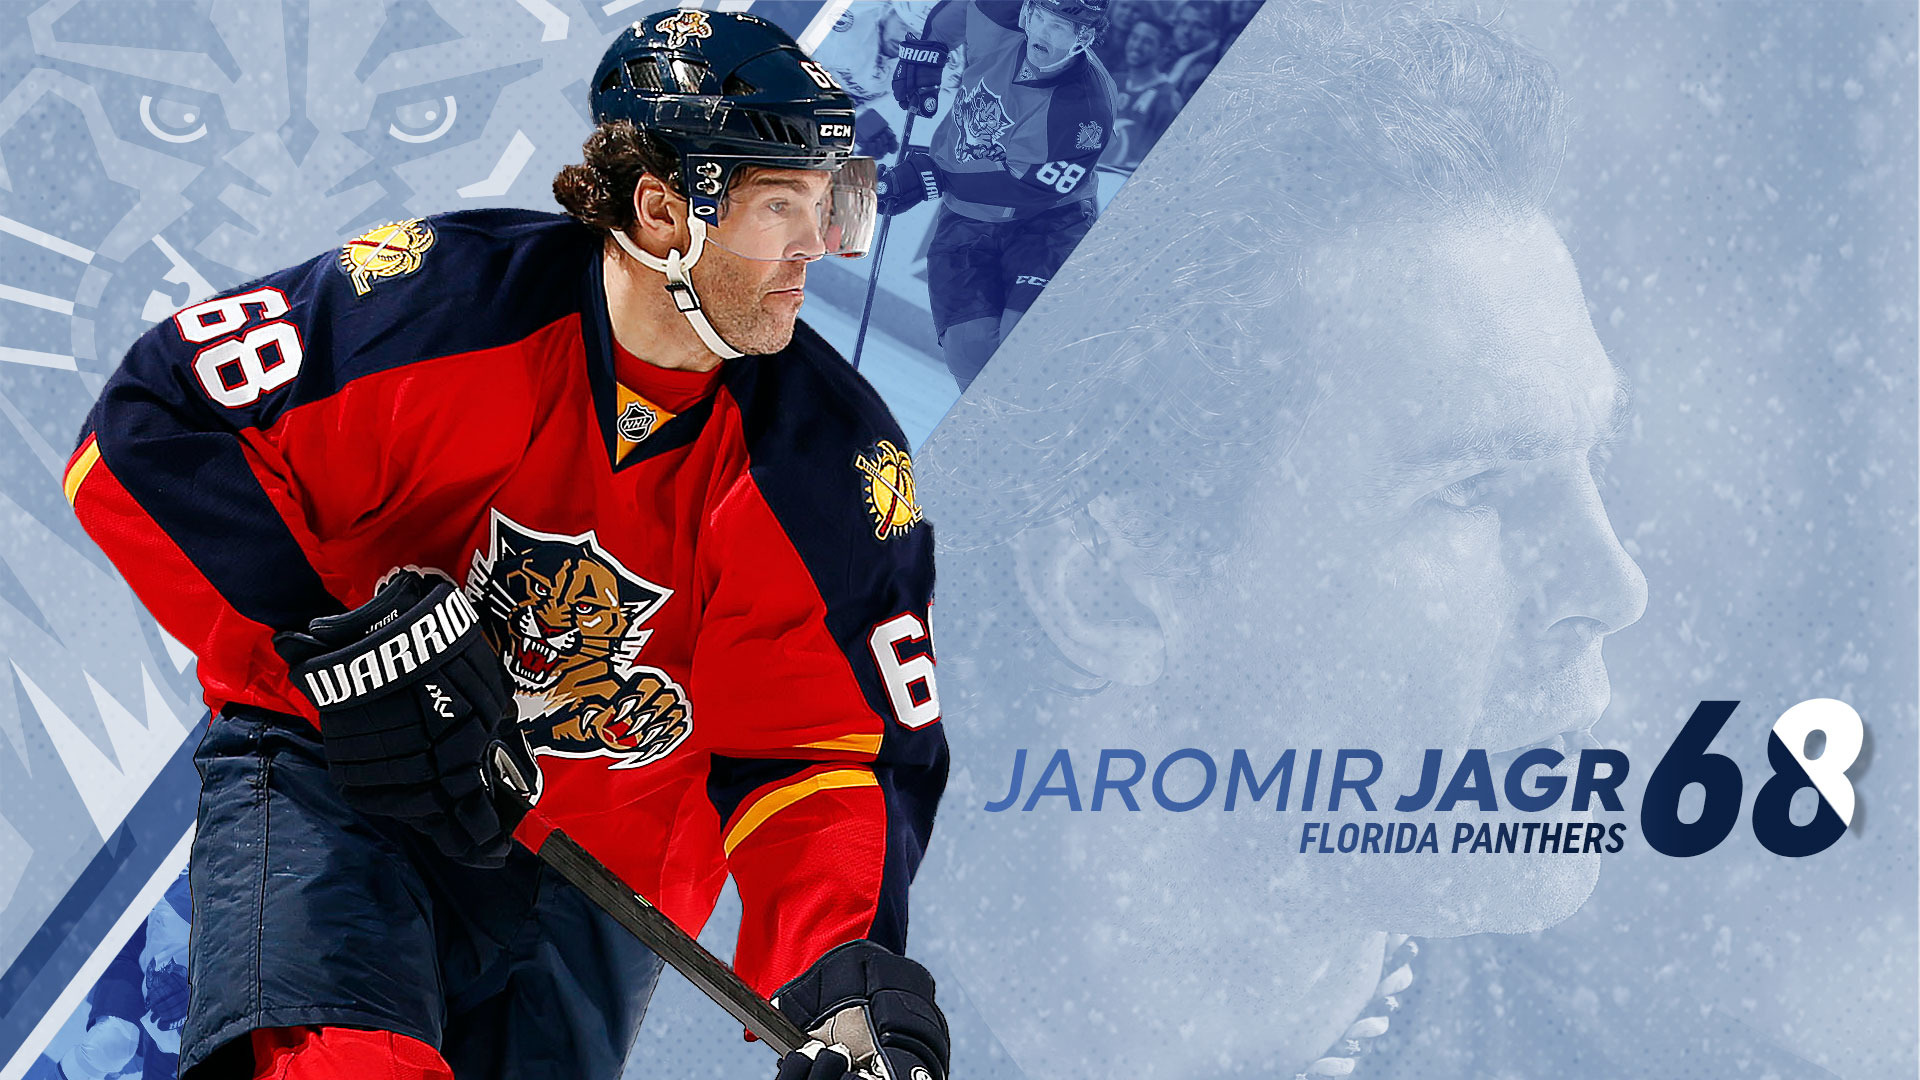 Panthers Wallpapers   Florida Panthers   Fan Zone